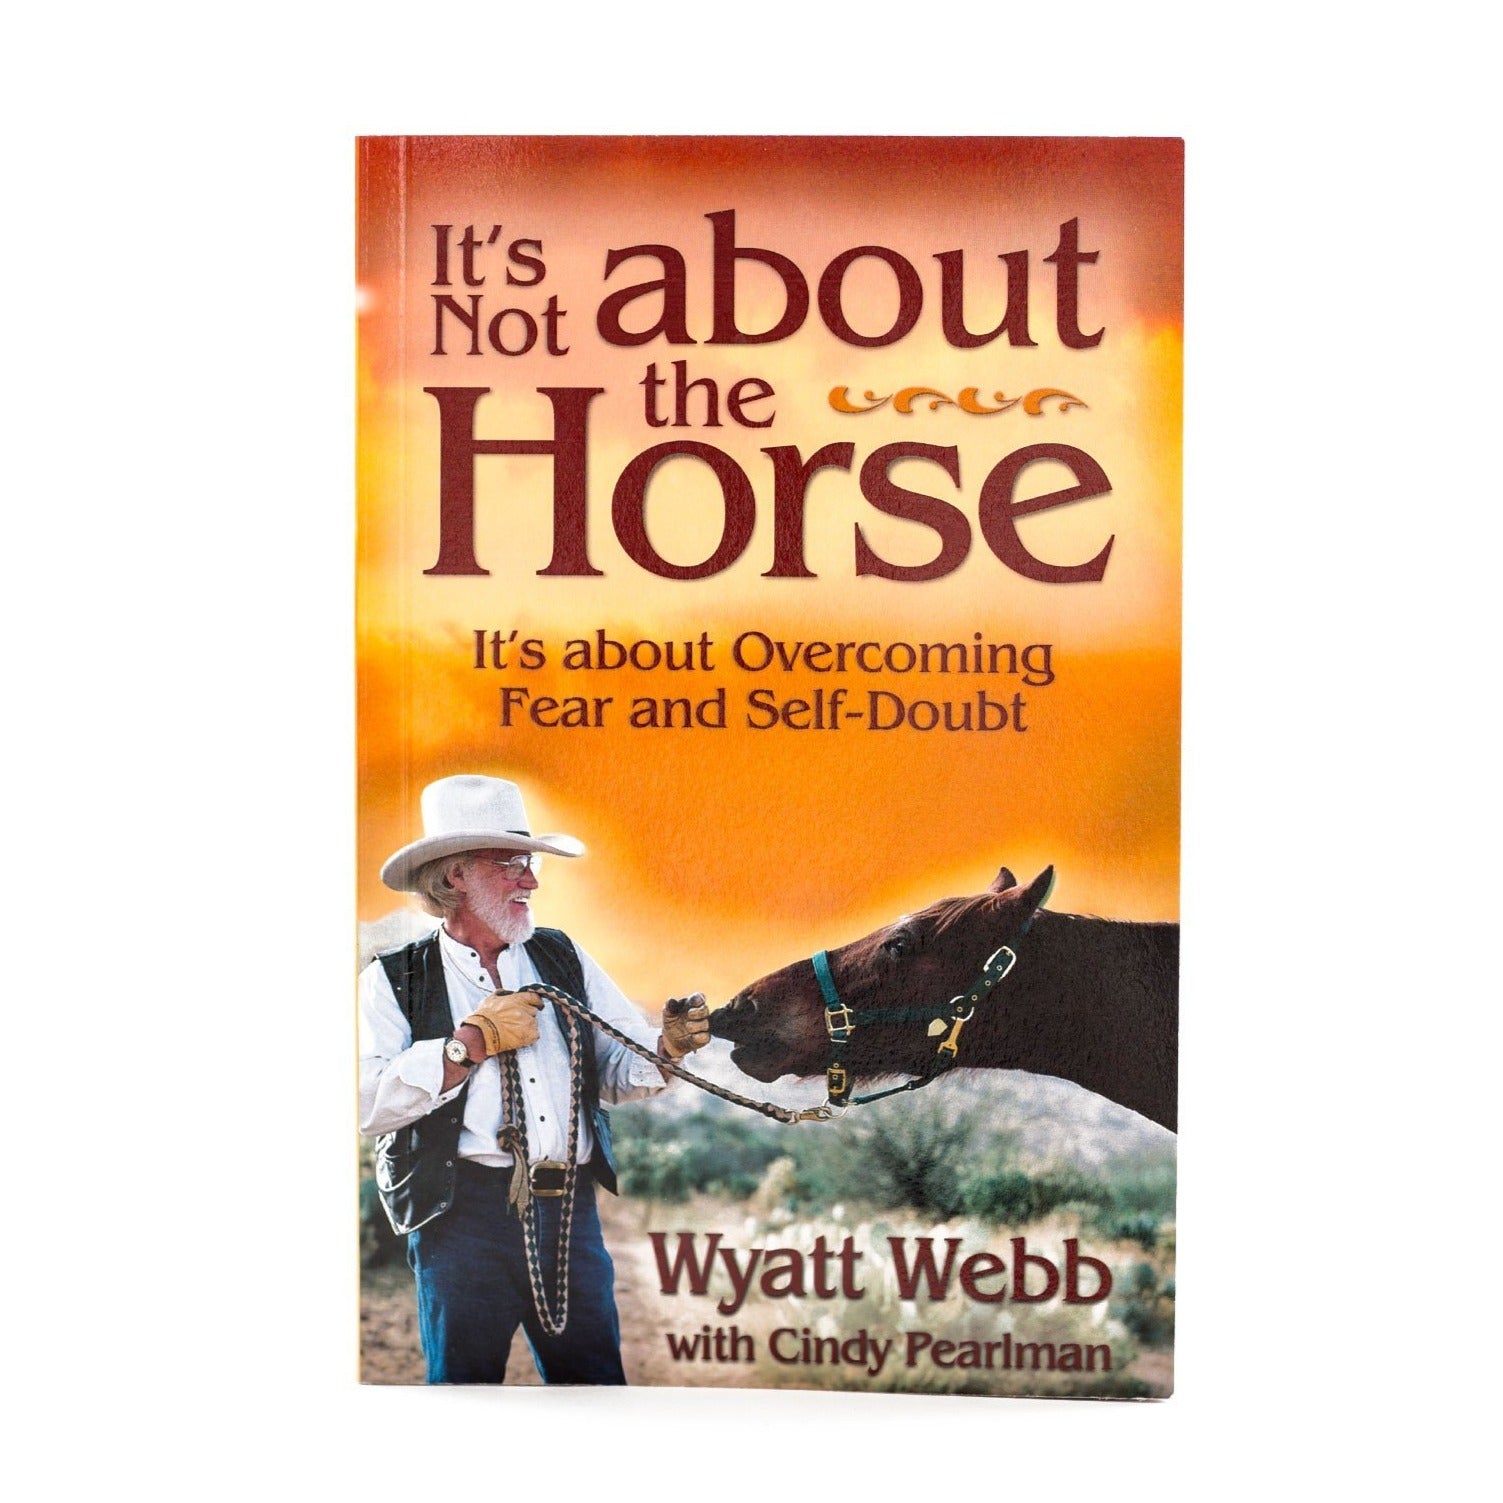 It's Not about the Horse by Wyatt Webb